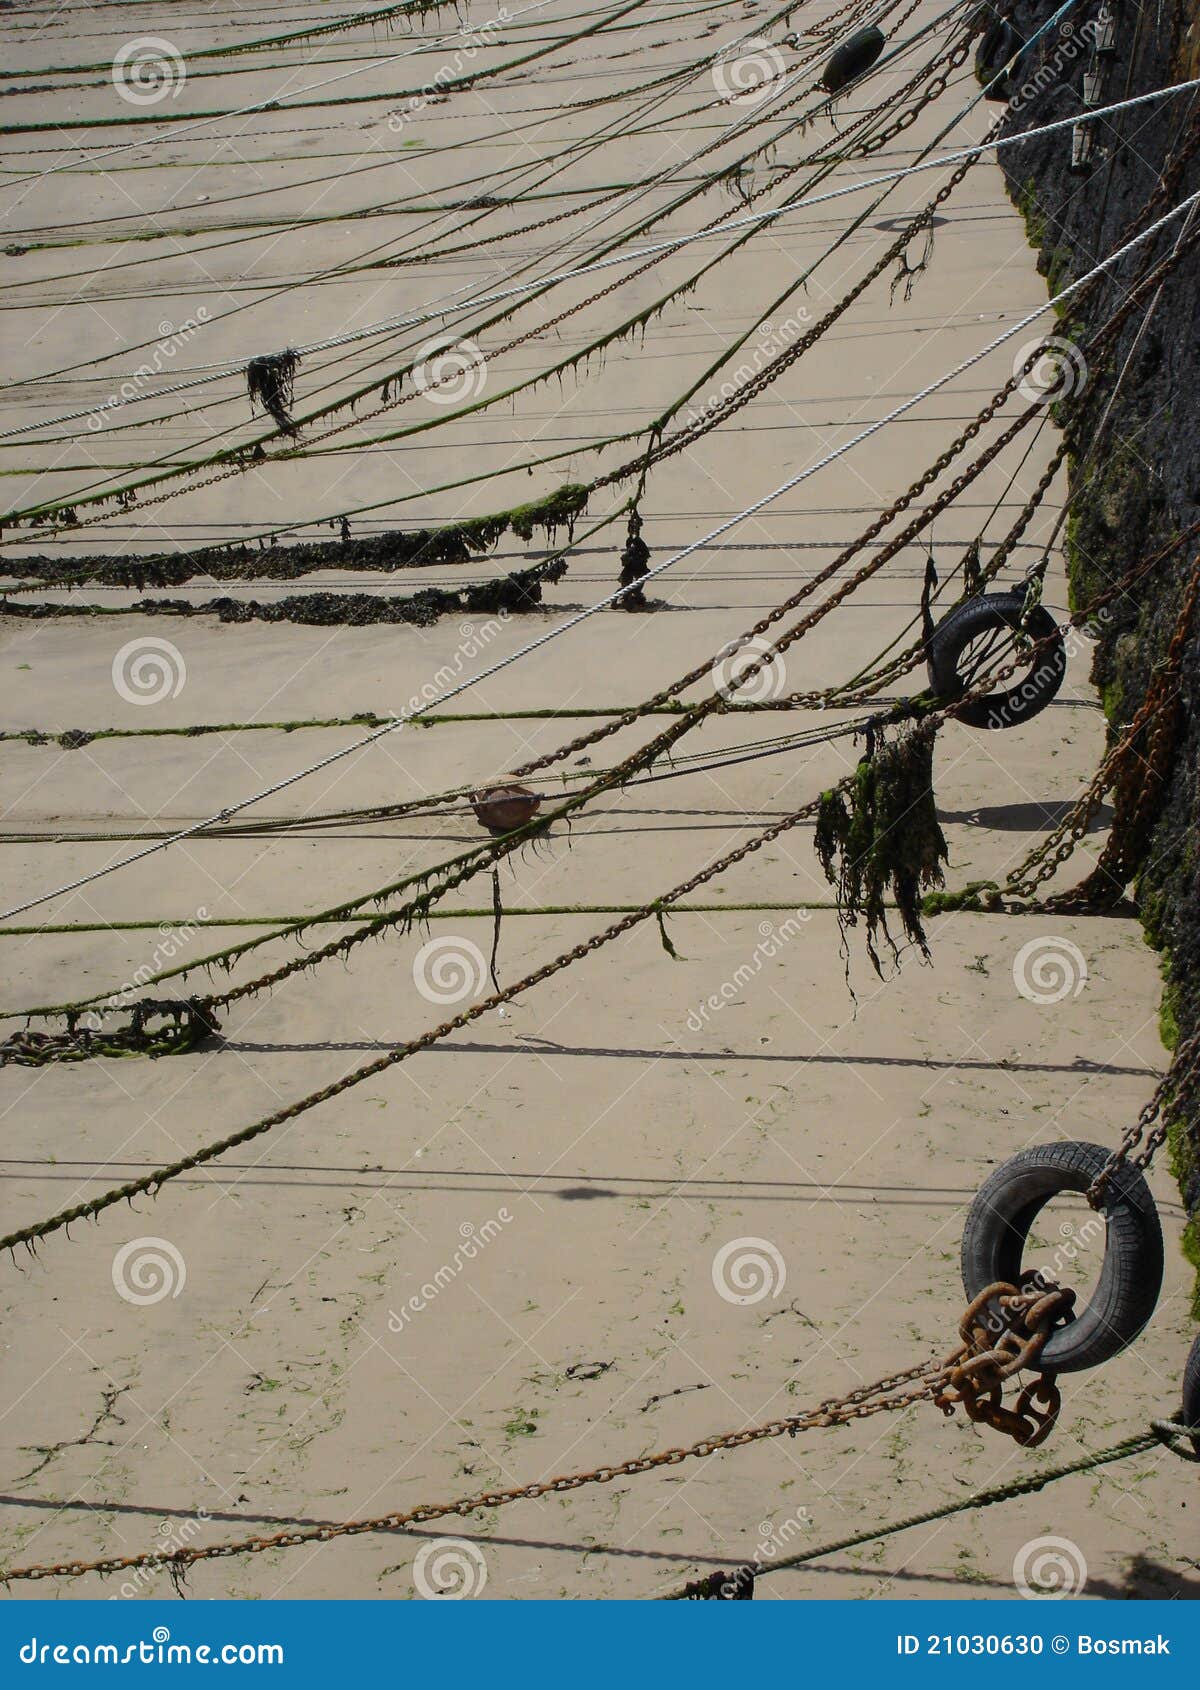 https://thumbs.dreamstime.com/z/anchor-lines-jersey-channel-islands-21030630.jpg